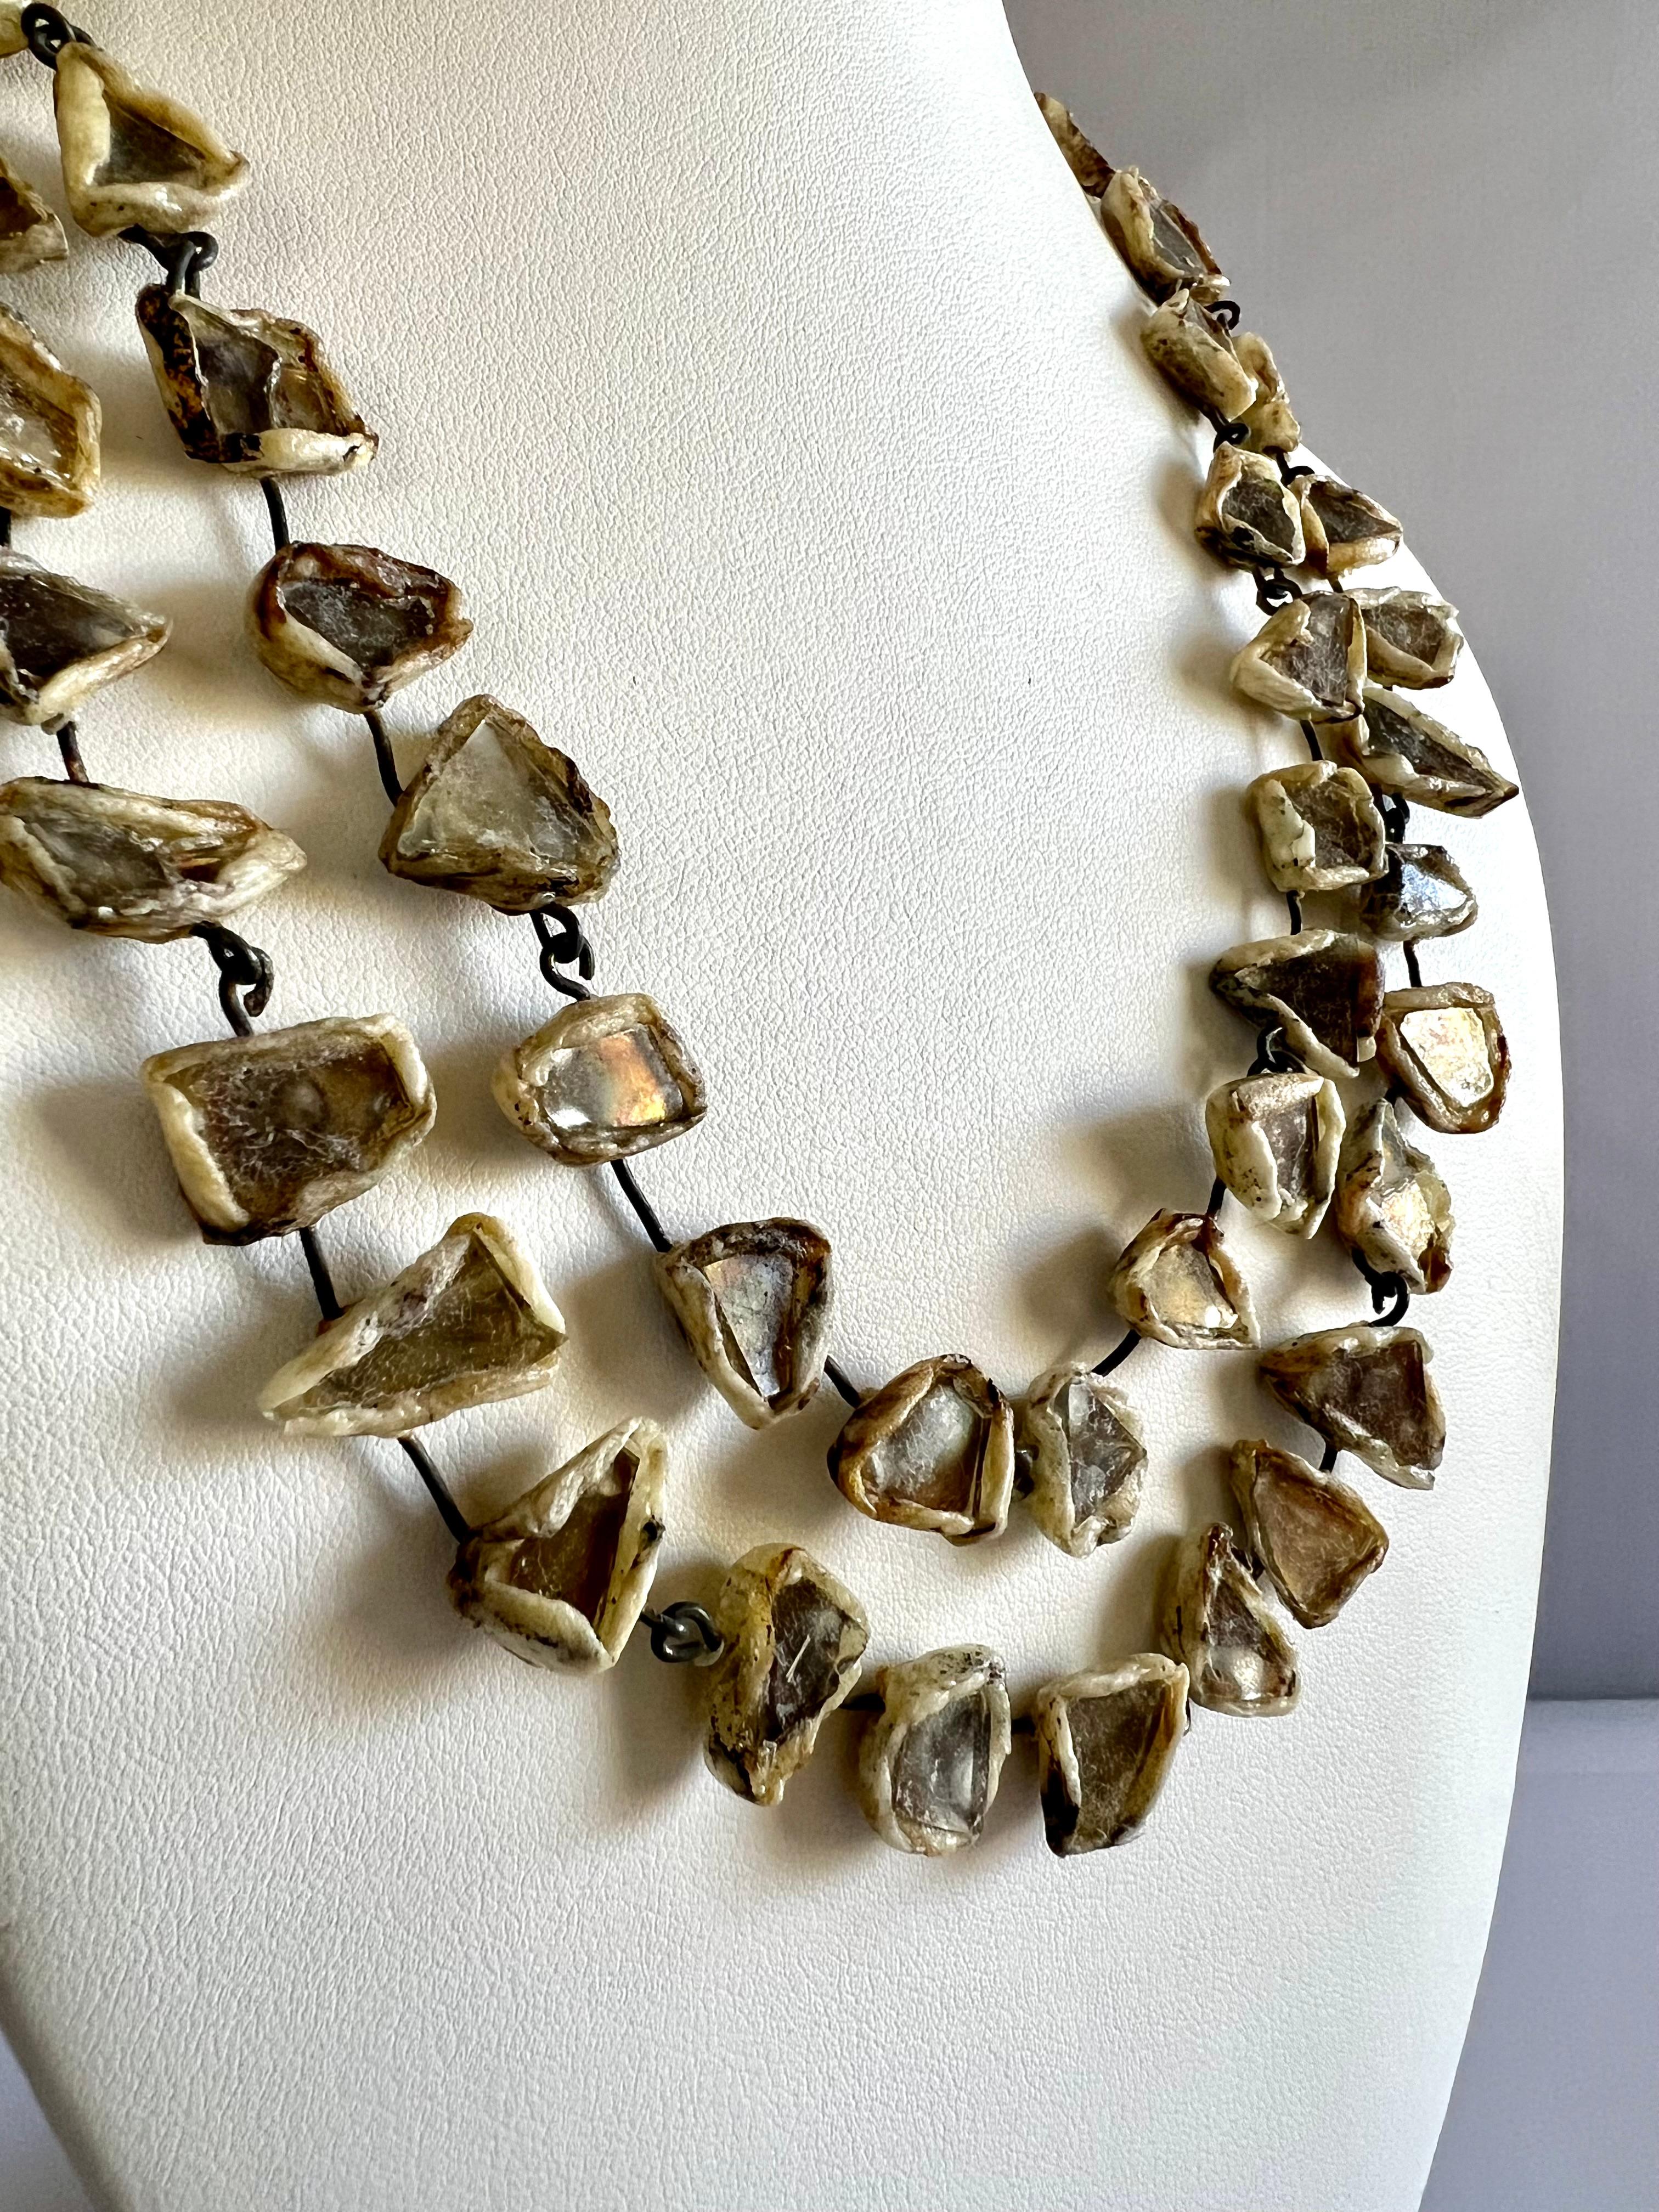 Spectacular necklace in delicate golden bronze mirrored fragments, all set in cream colored 'talousel',  French resin, by Line Vautrin - made in France circa 1960s.


